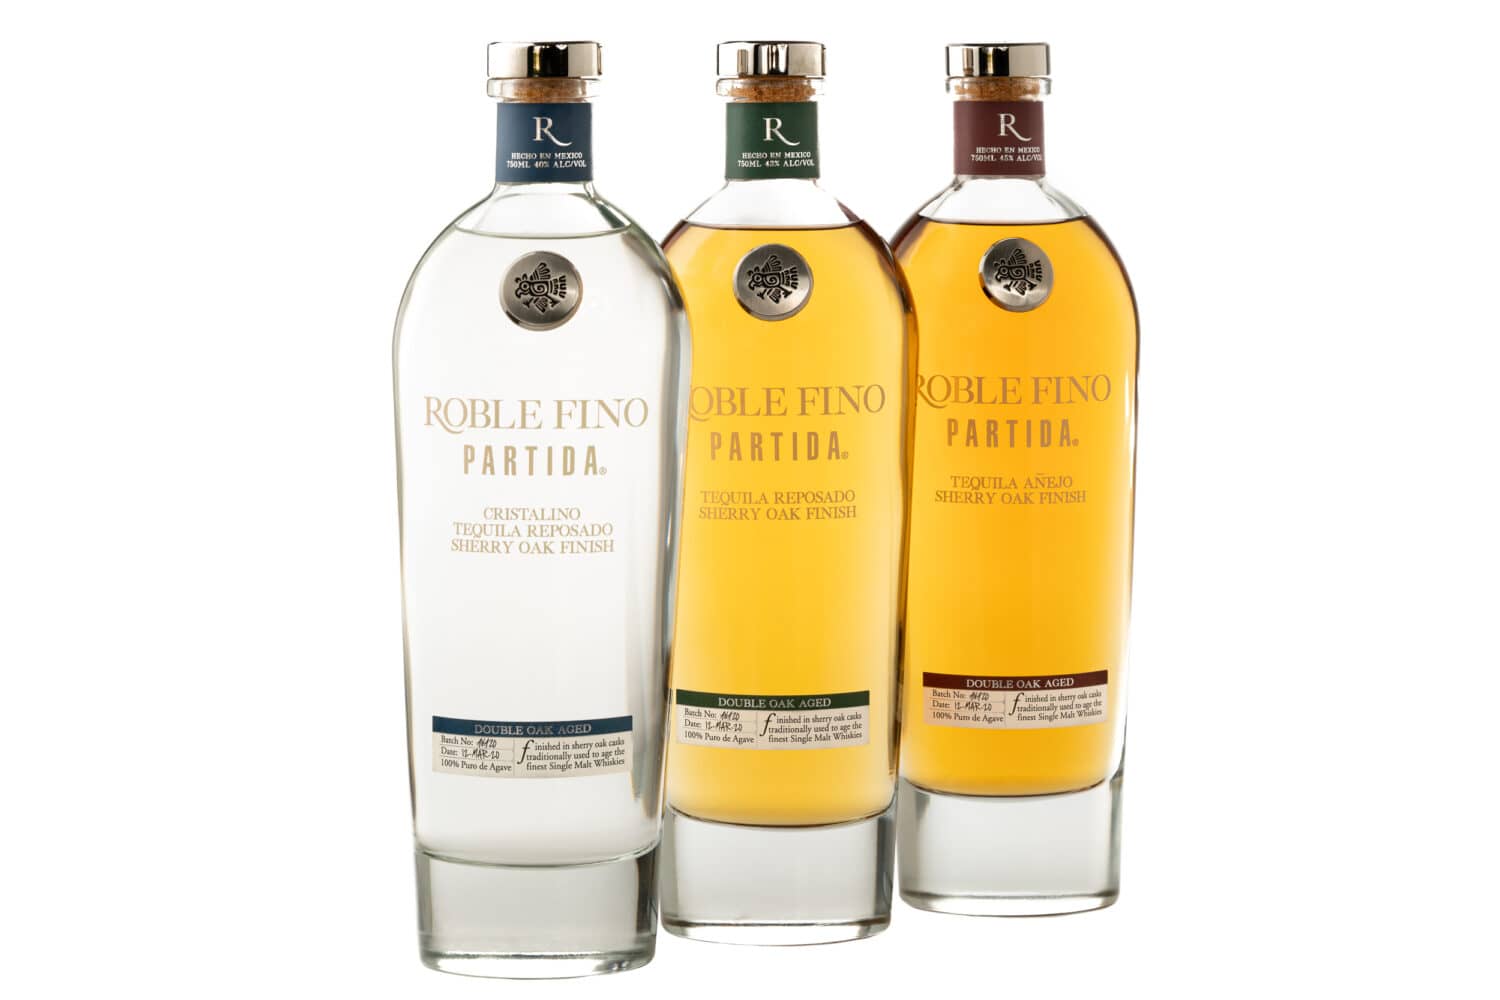 Lucas Bols acquires Tequila Partida to tap into growing spirits category